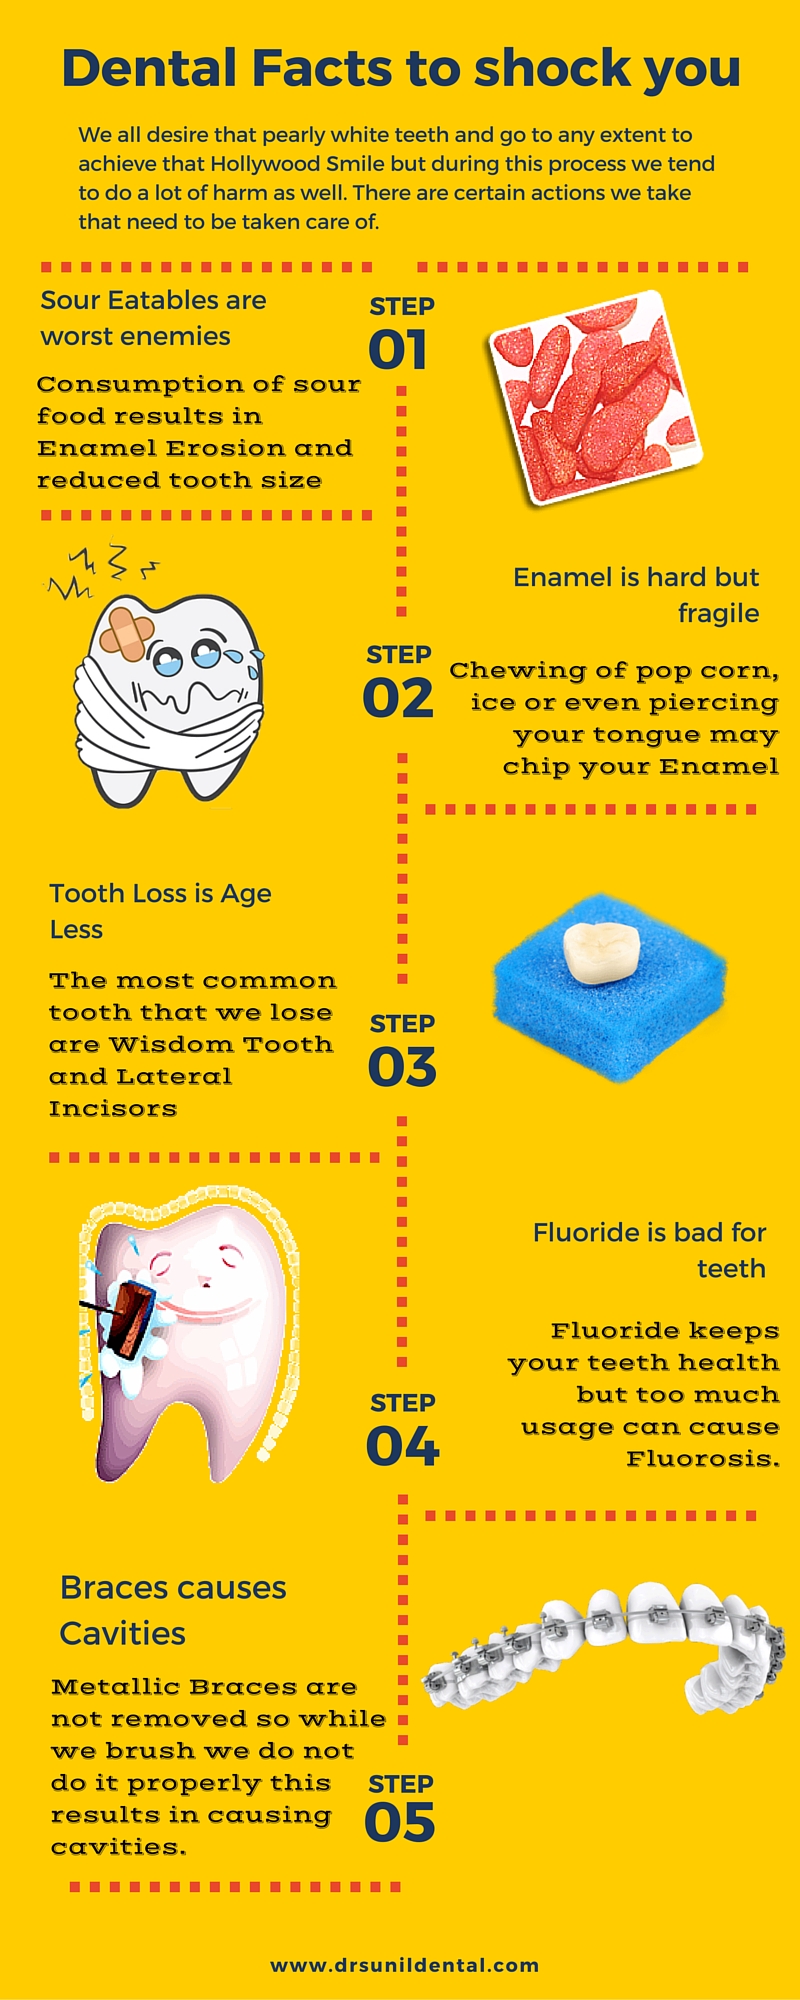 Dental Facts to shock you